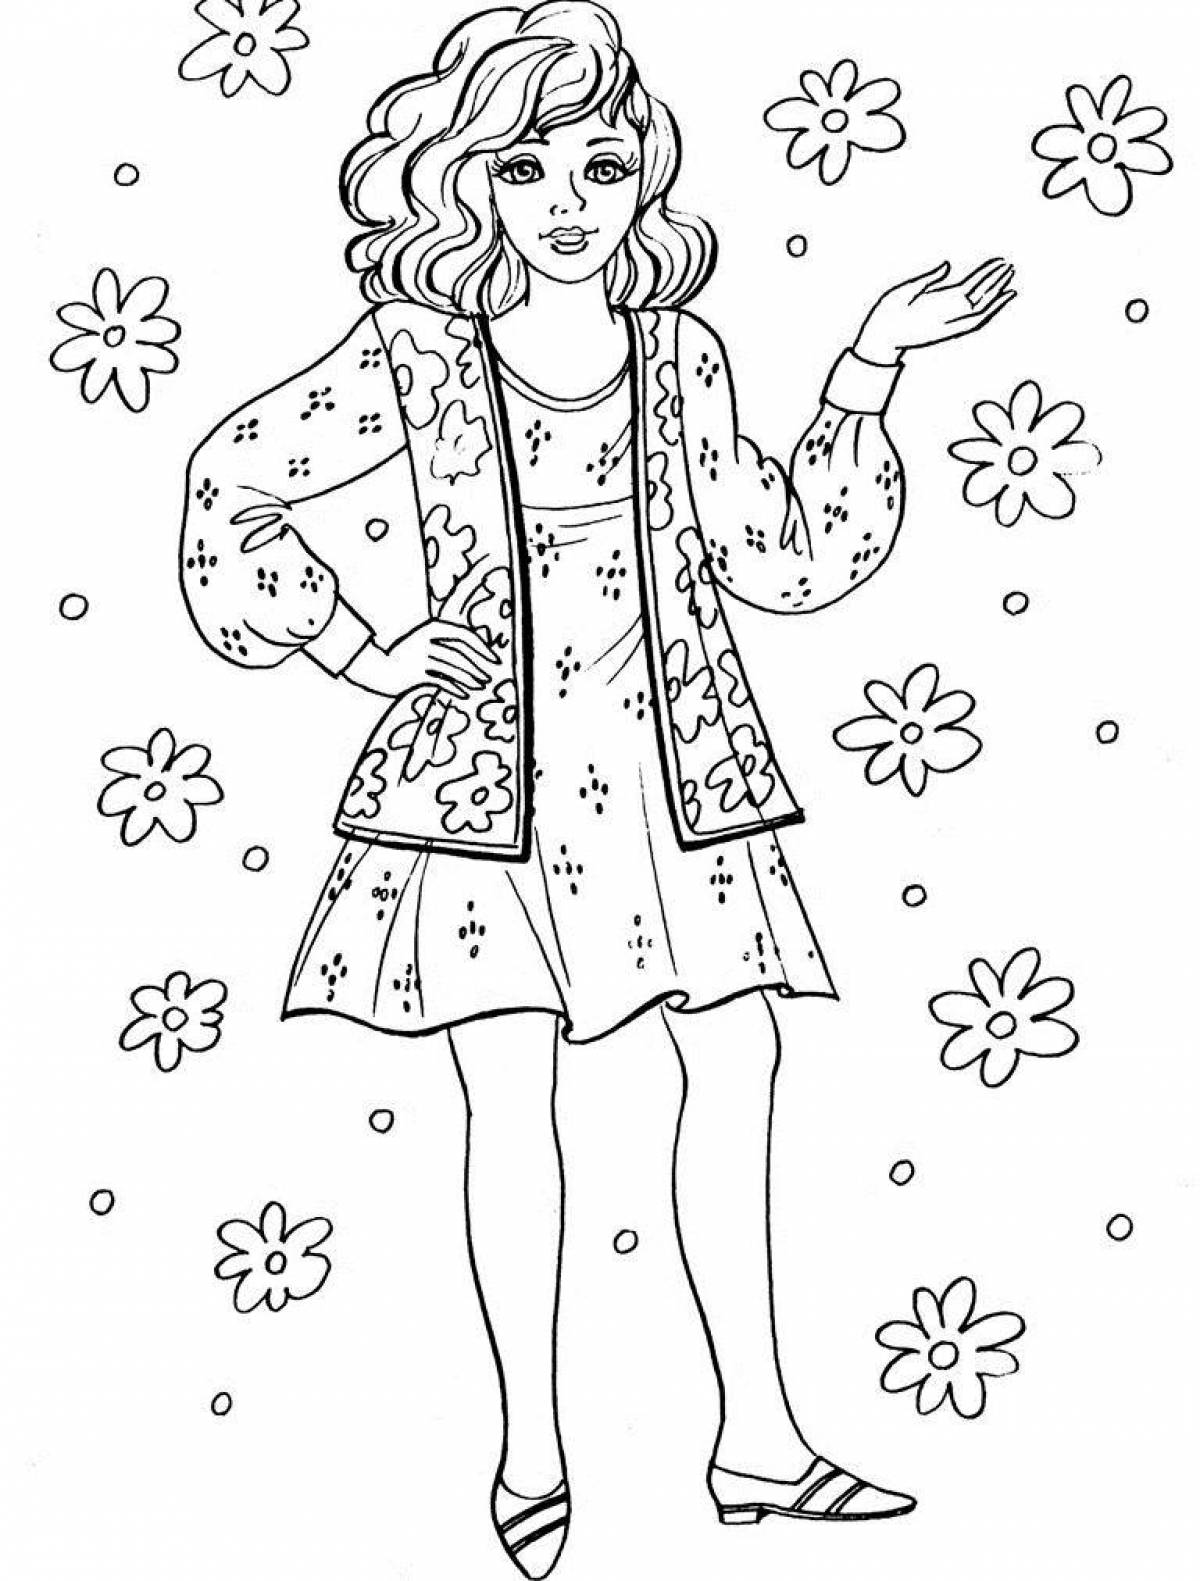 Color-frenzy coloring page for girls 11 years old